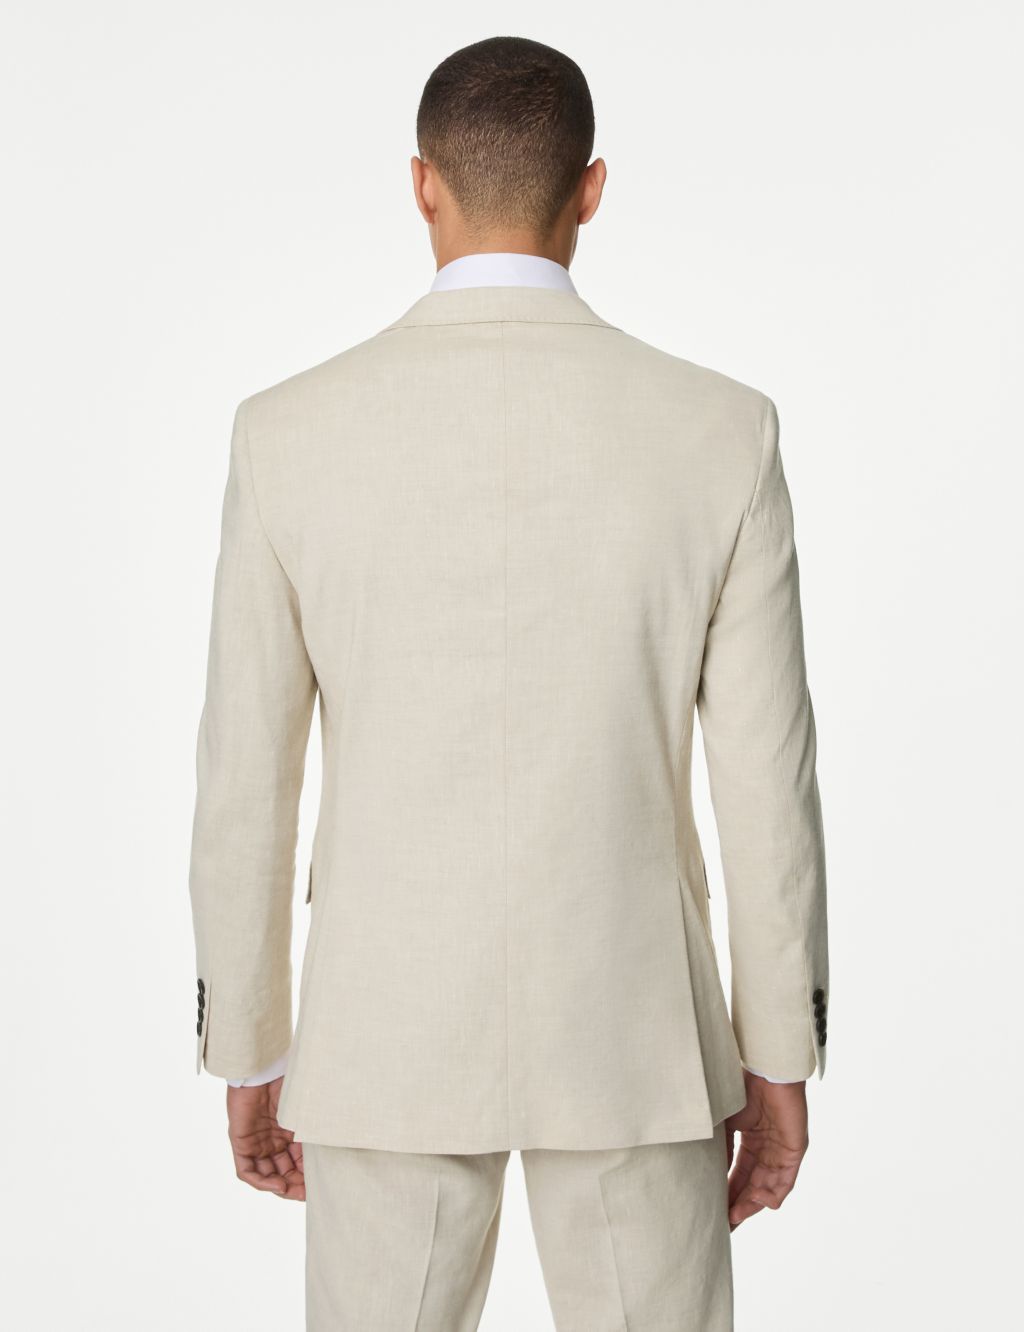 Tailored Fit Italian Linen Miracle™ Suit image 3